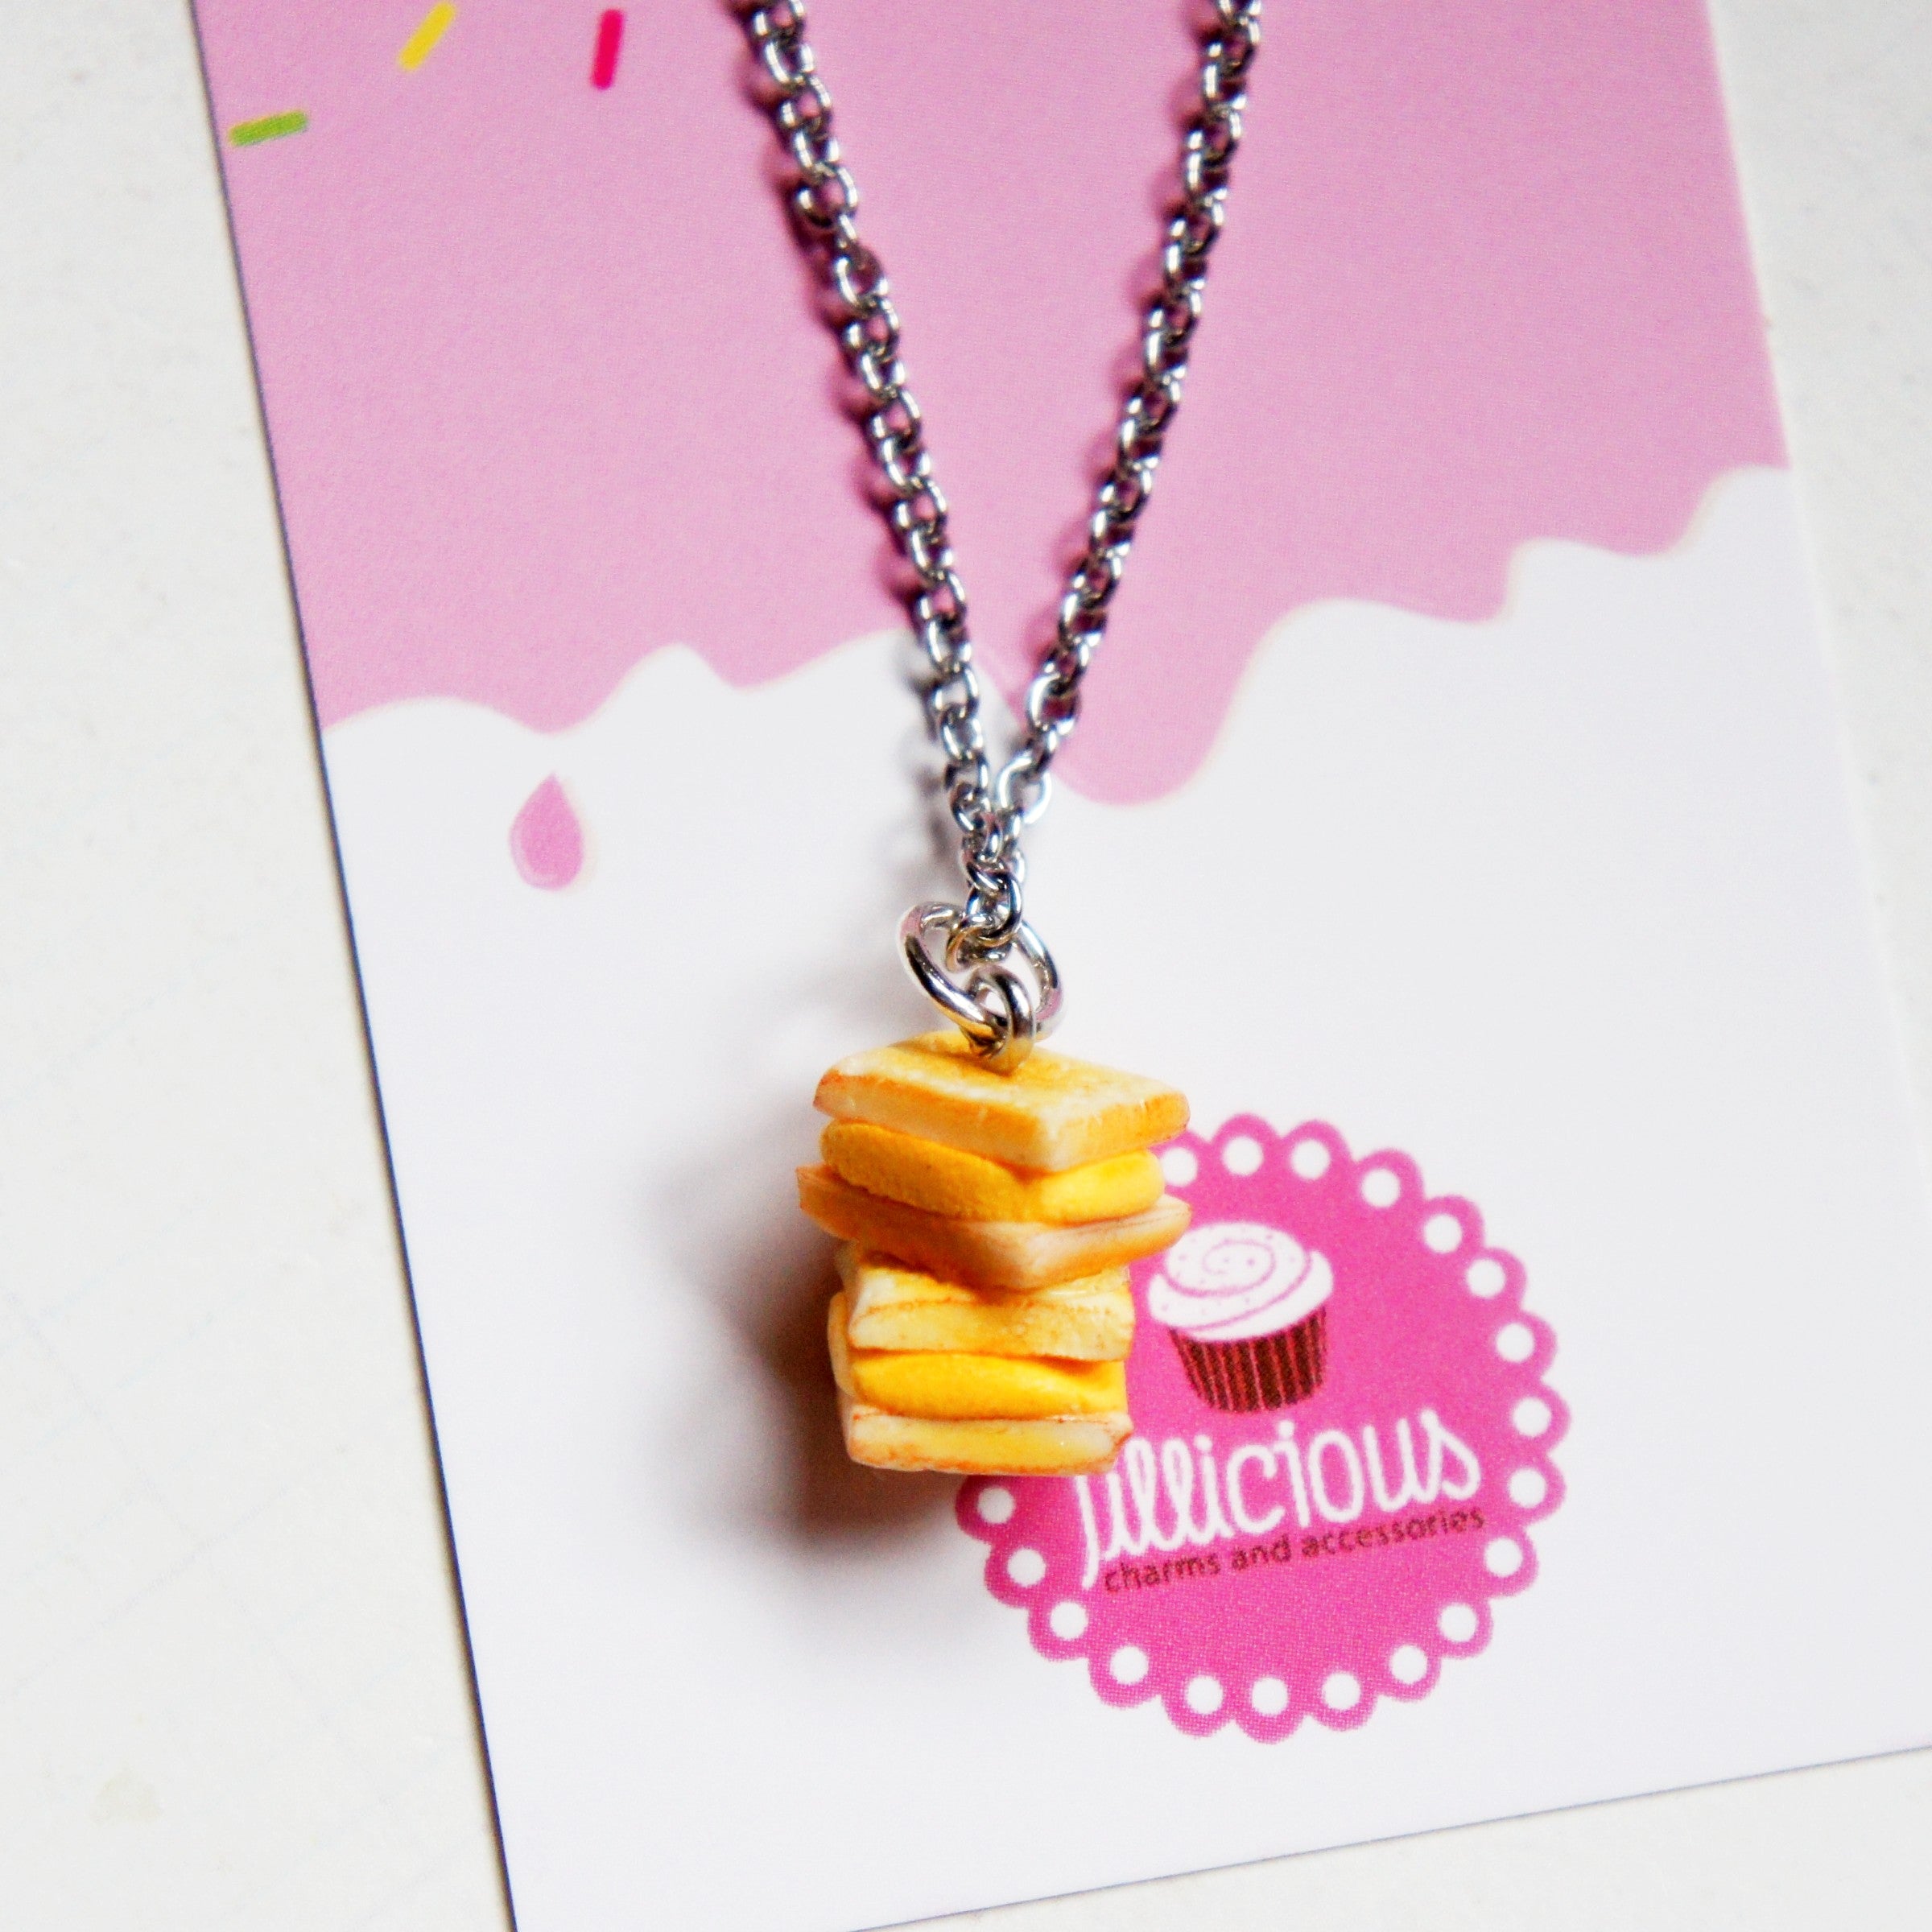 Grilled Cheese Sandwich Necklace